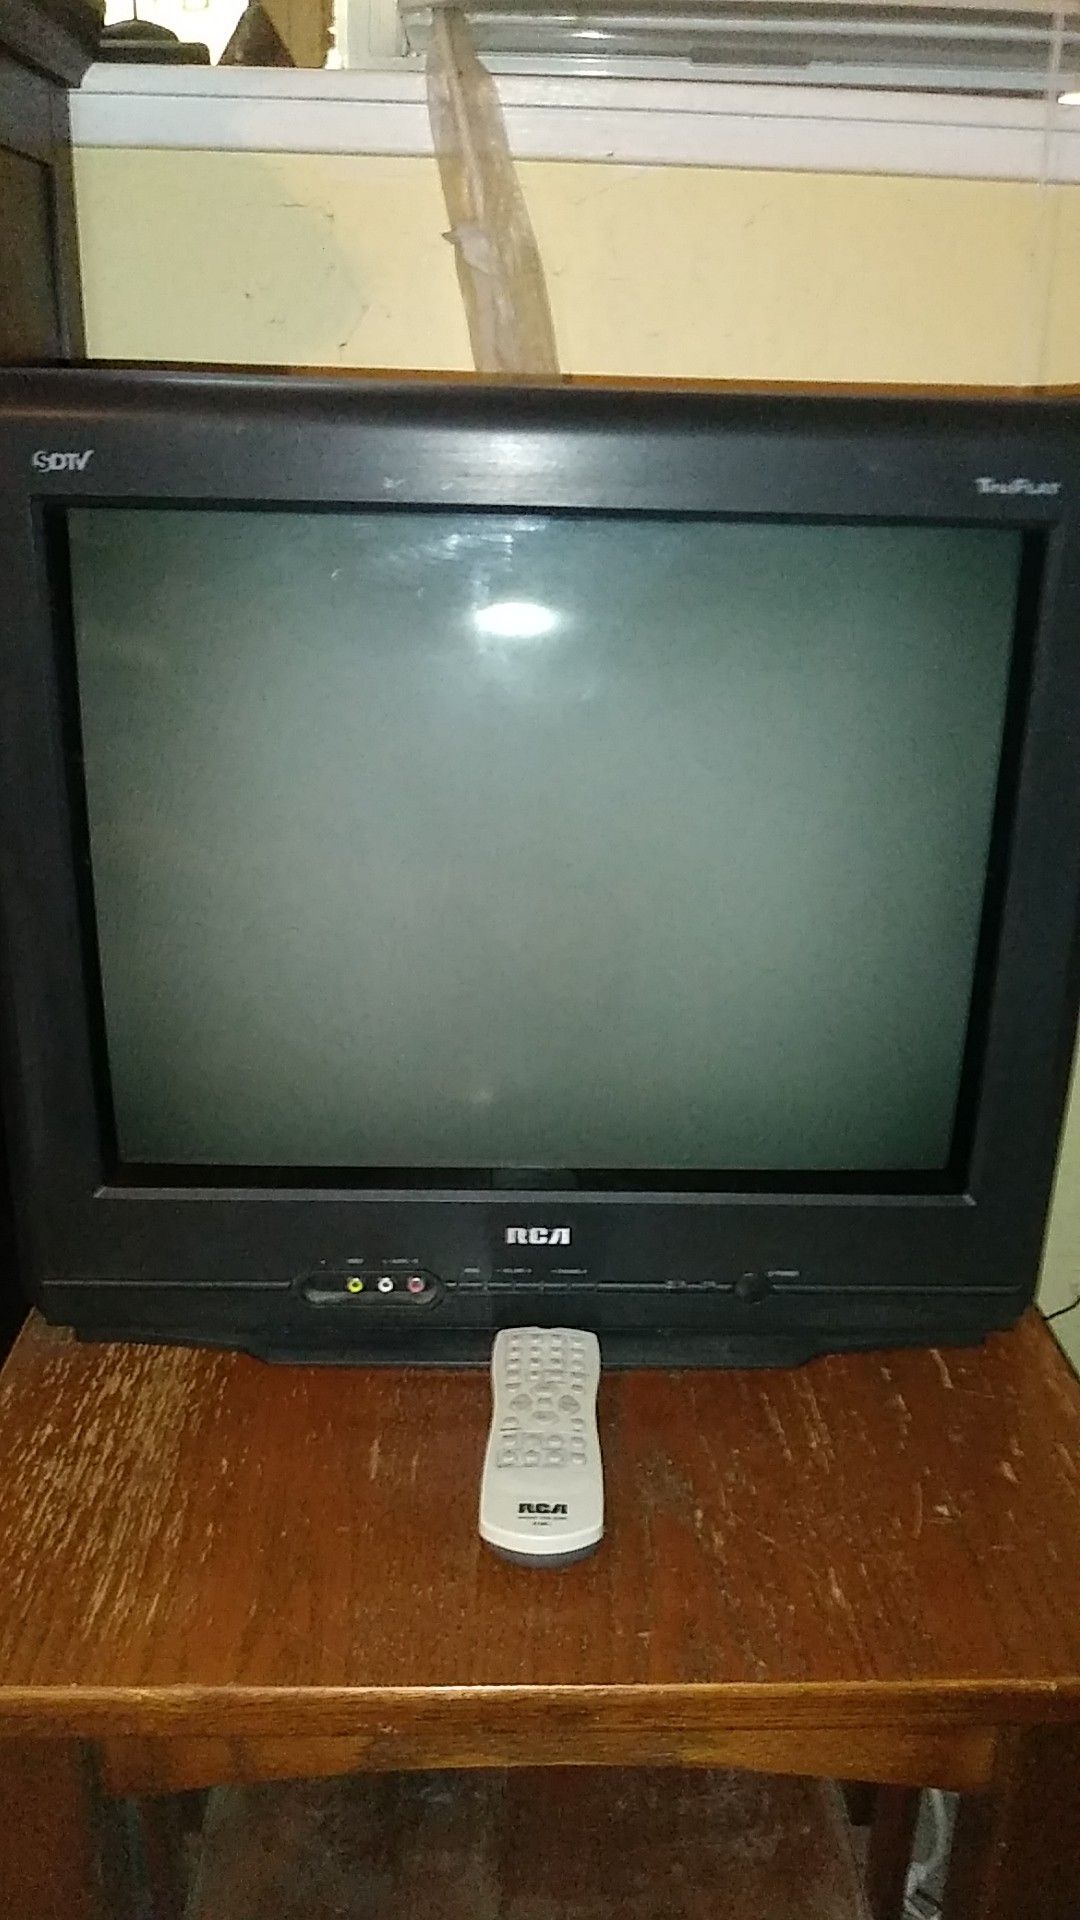 Free. 20 inch diagonal flat screen TV. Works fine,with remote